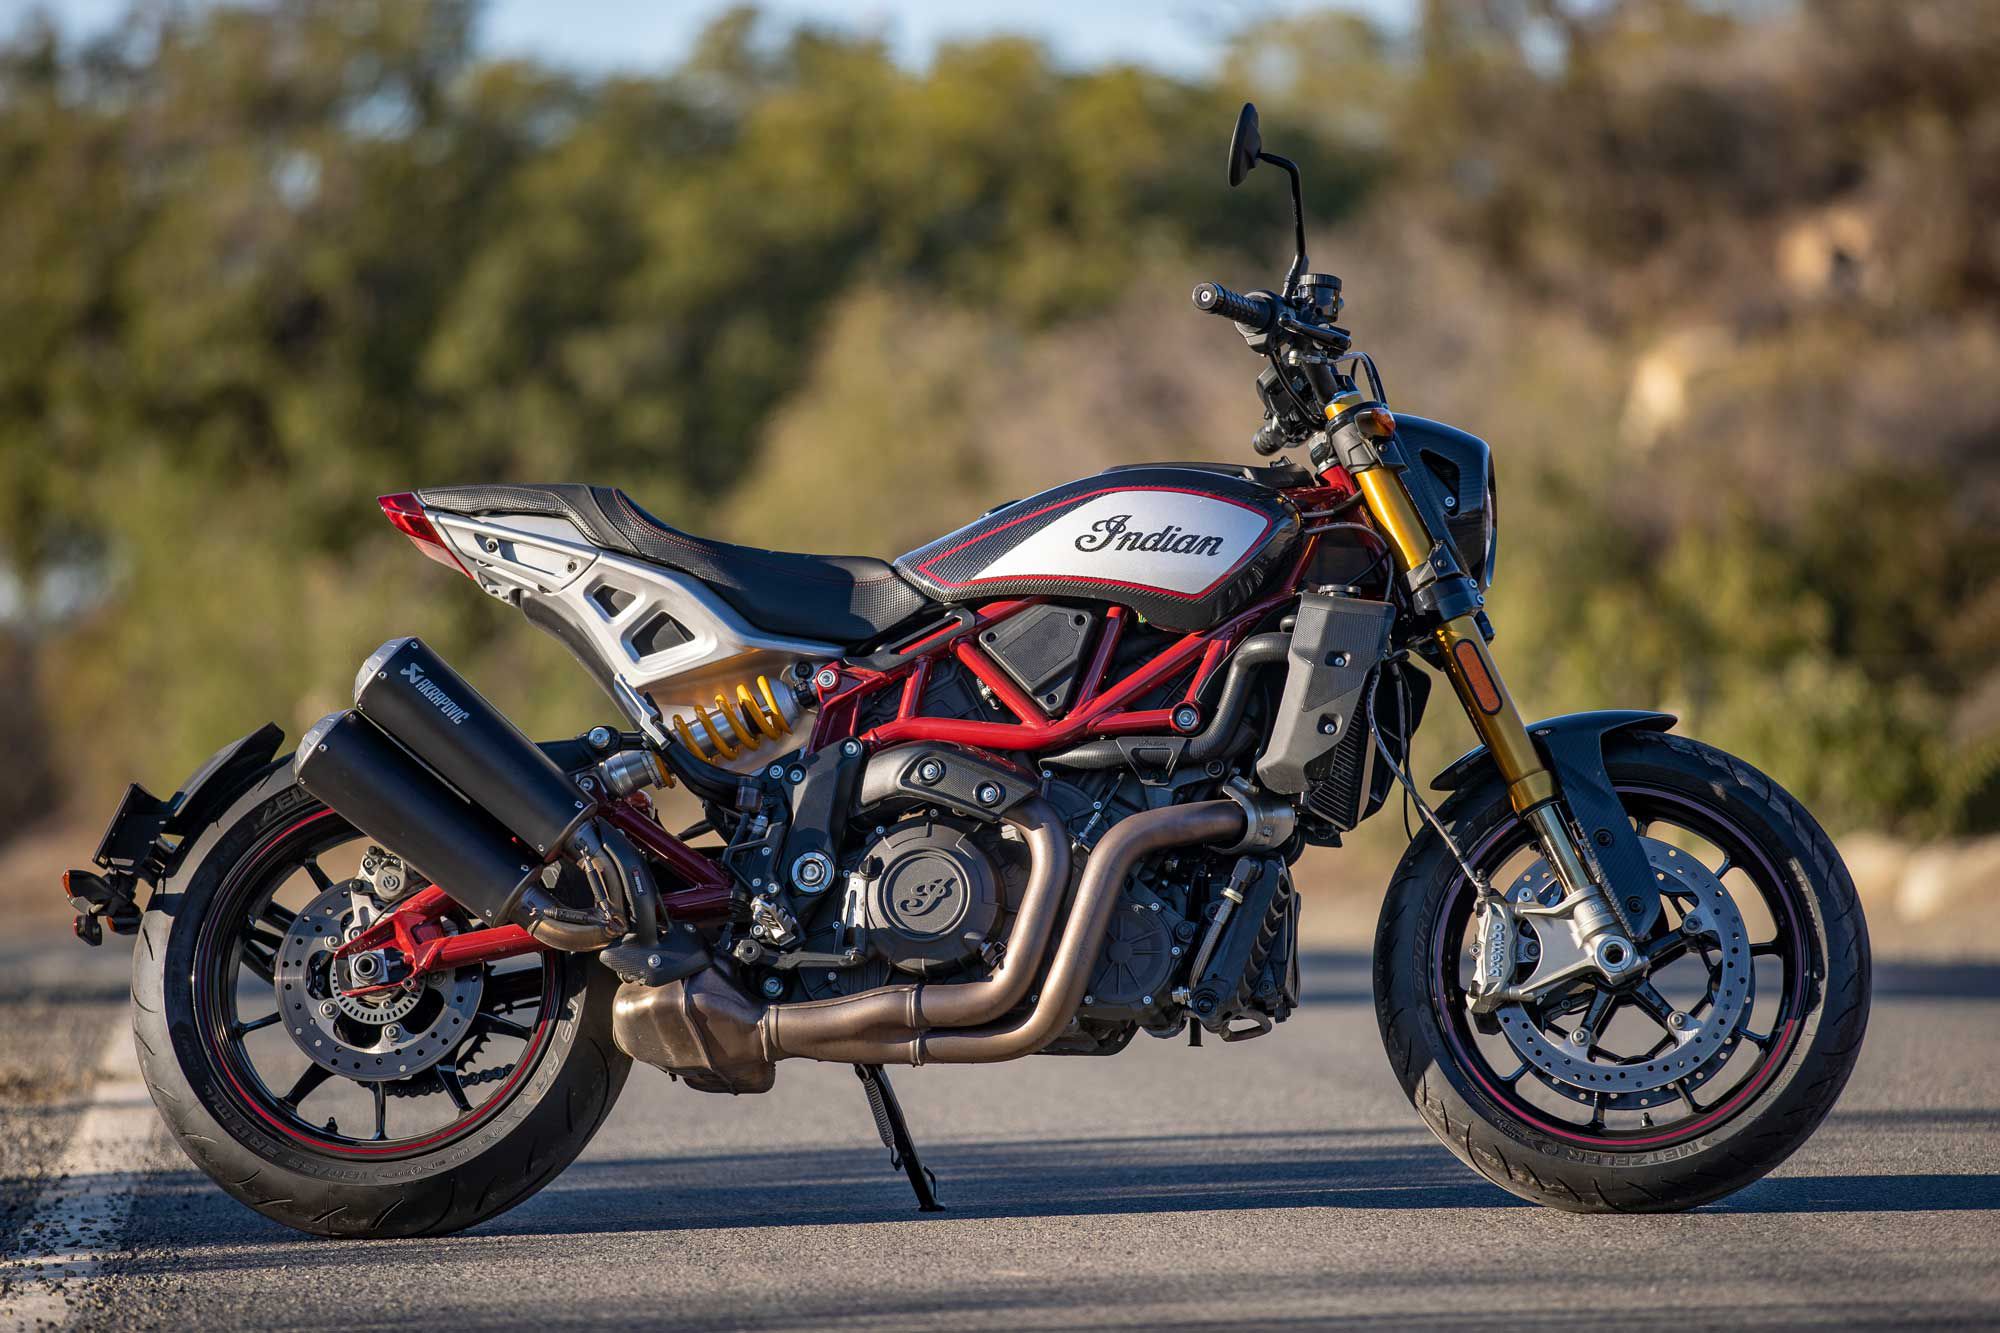 The 2022 Indian Motorcycle FTR R Carbon is Indian’s top-of-the line street tracker-style road bike ringing in at $16,999.